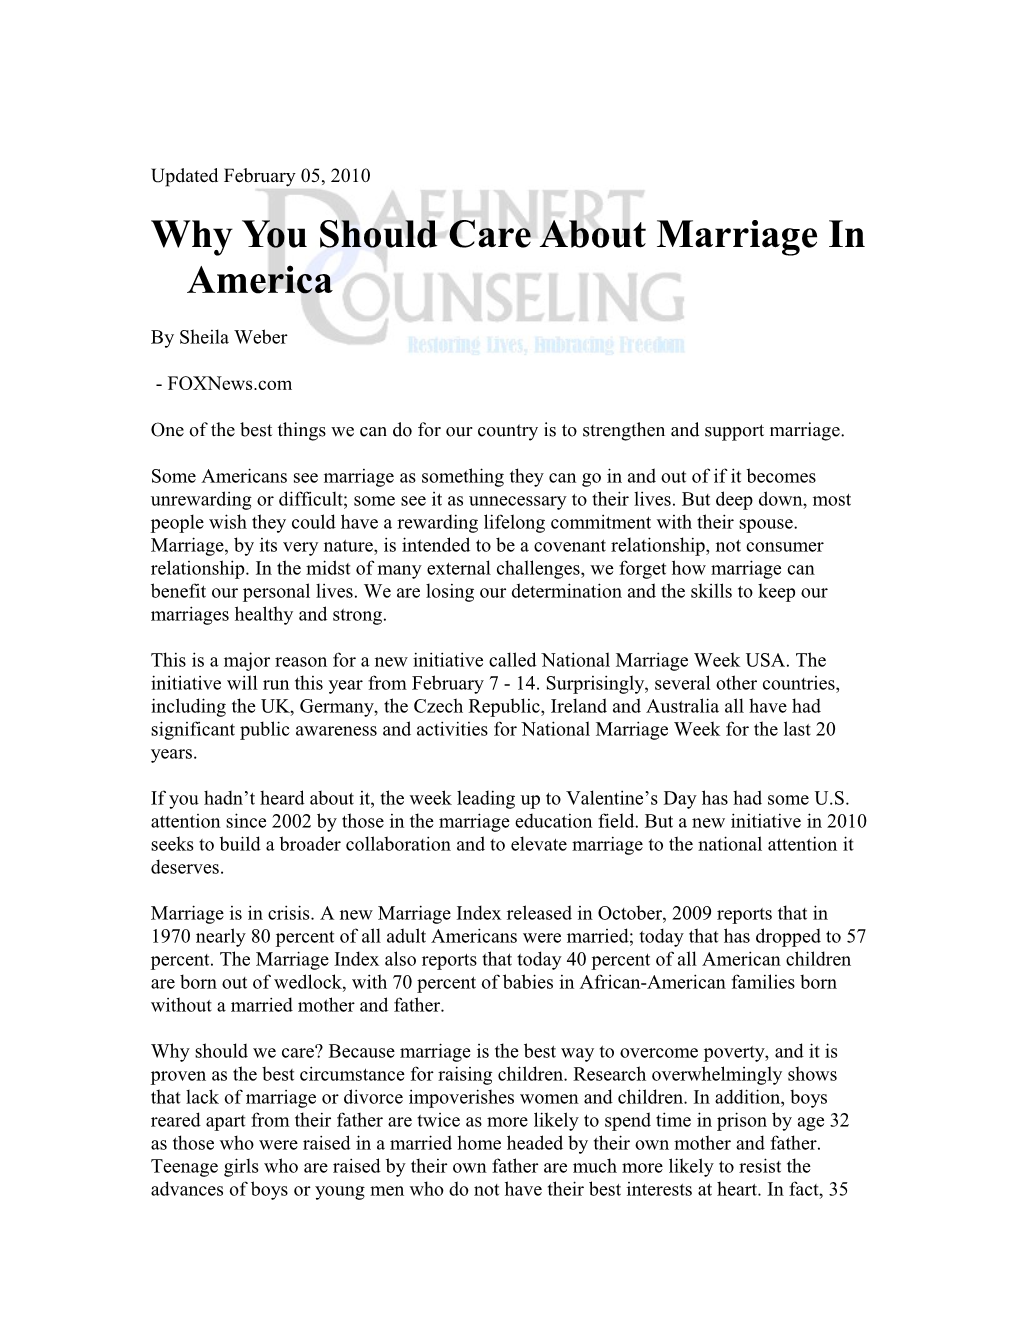 Why You Should Care About Marriage in America